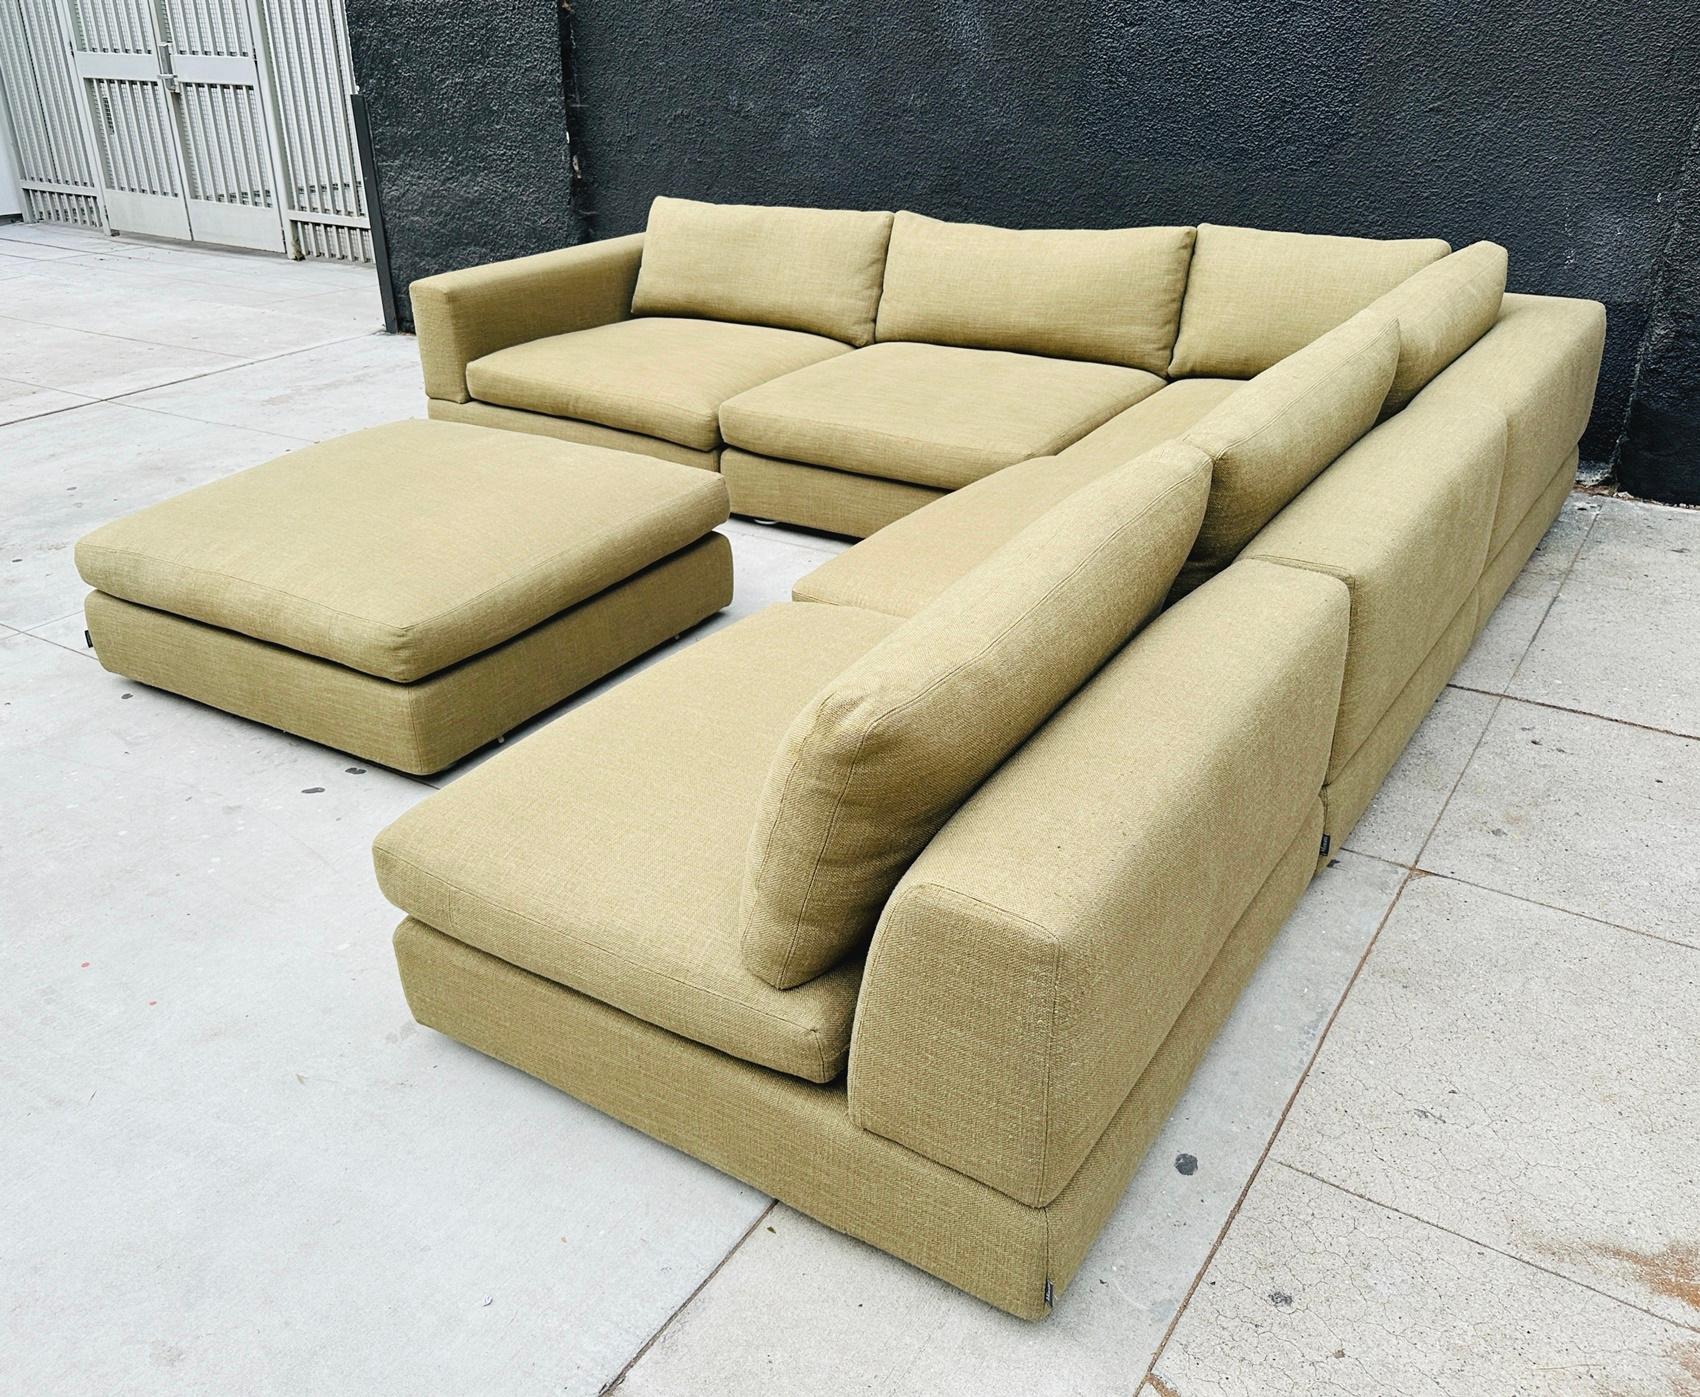 6 Piece Sectional Made in Italy by Rodolfo Dordoni for Minotti, Italy 2006 For Sale 4